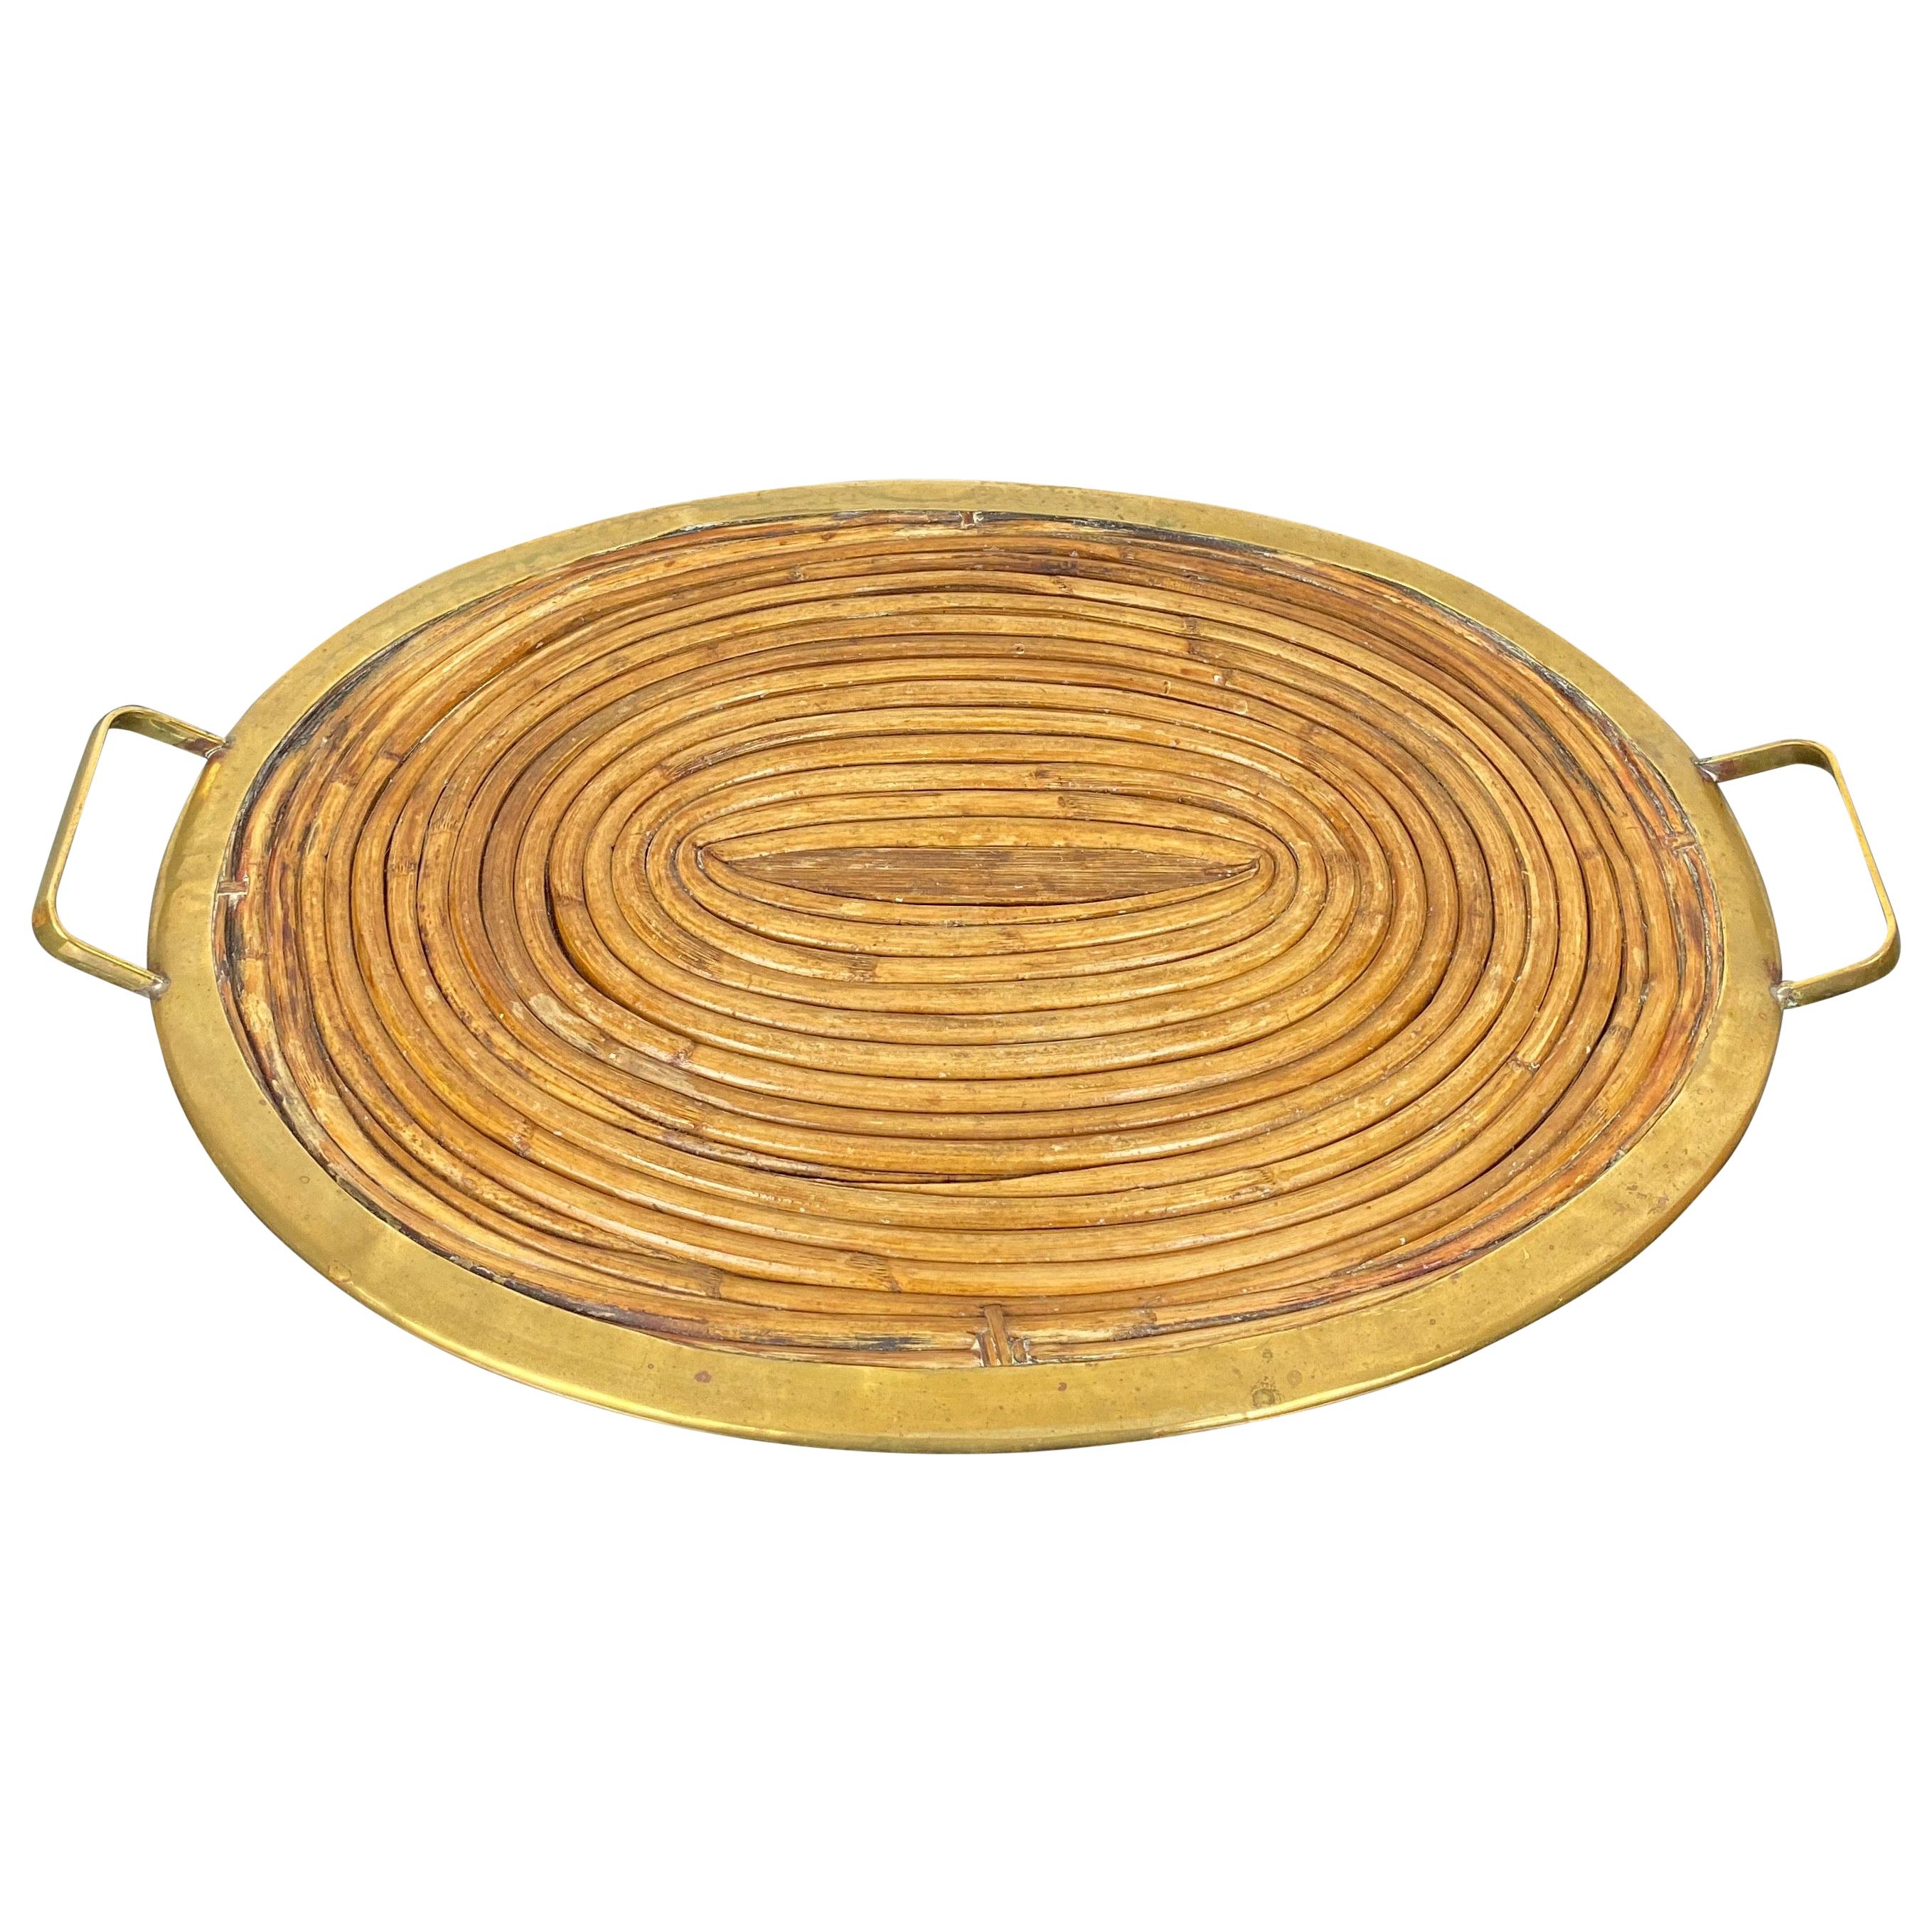 Serving Tray in Bamboo and Brass, Italy, 1970s